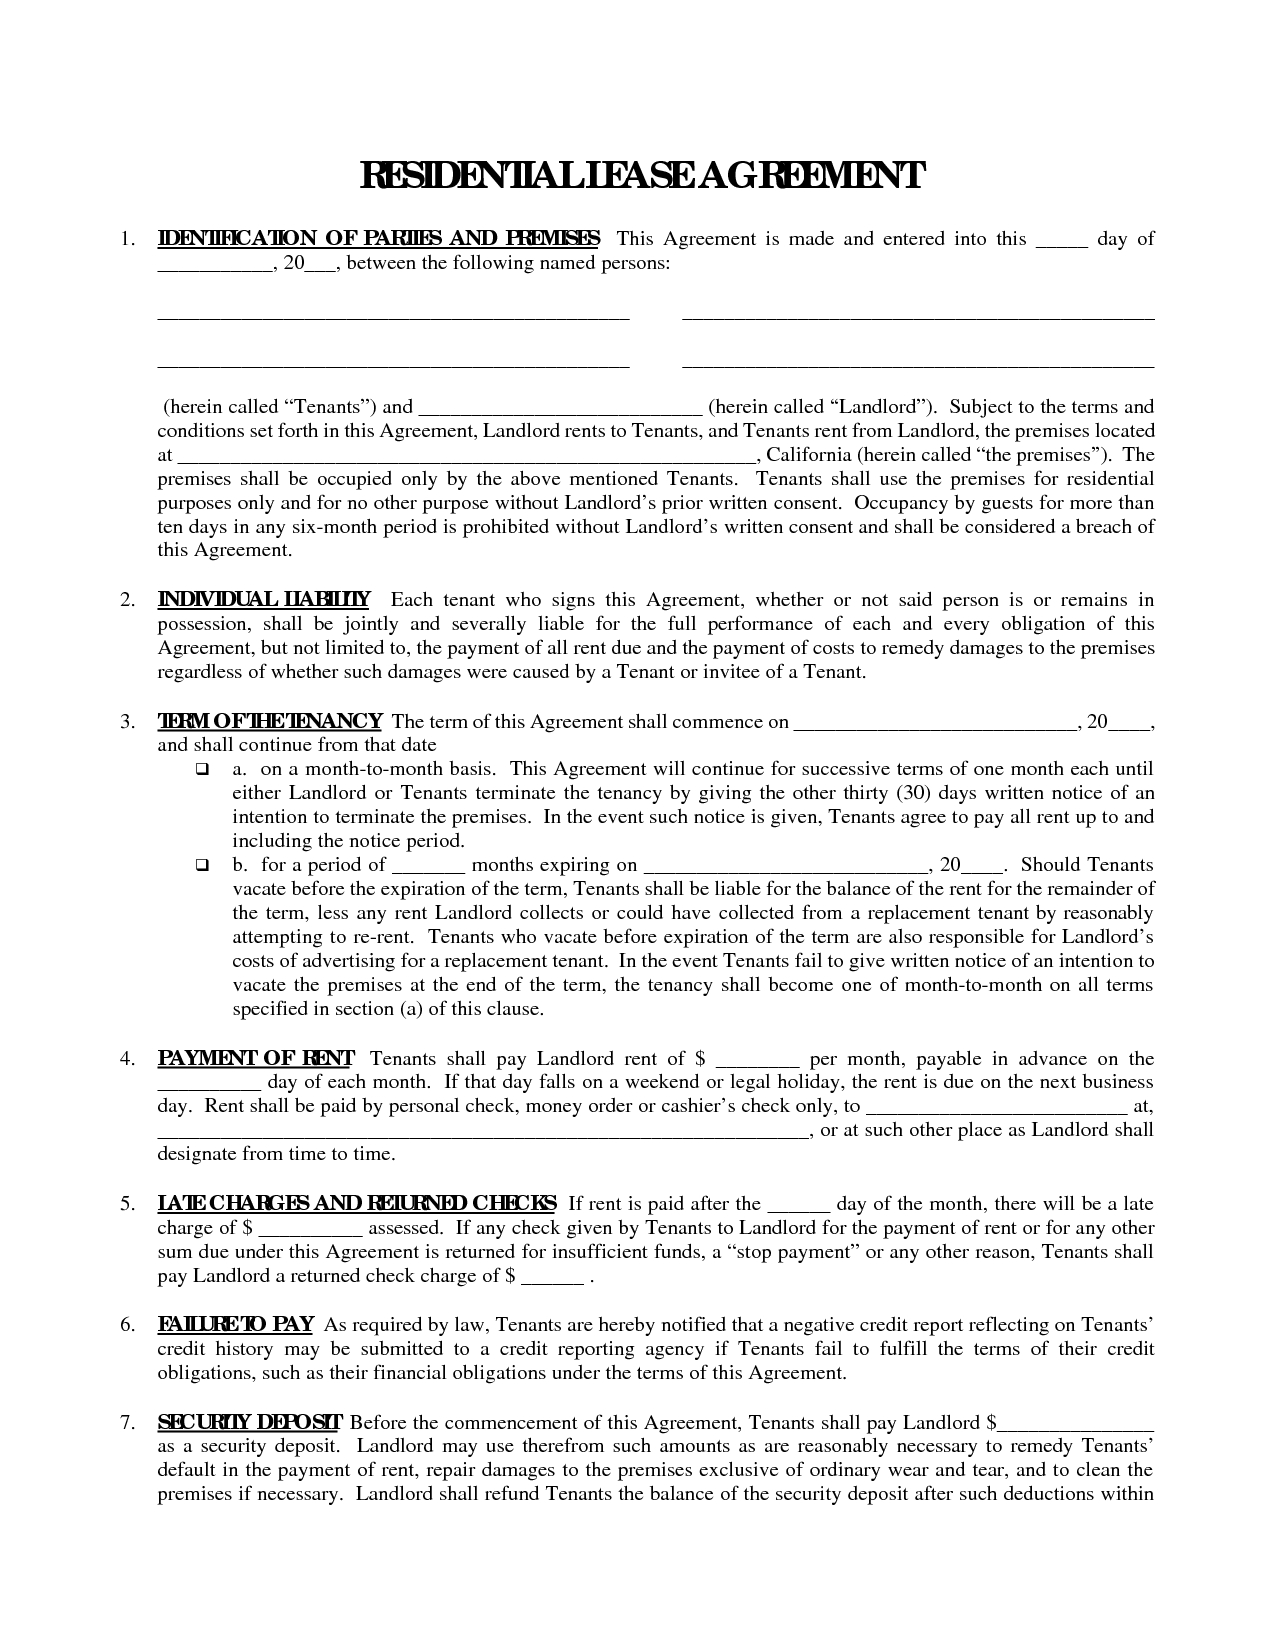 Printable Residential Free House Lease Agreement | Residential Lease - Free Printable Lease